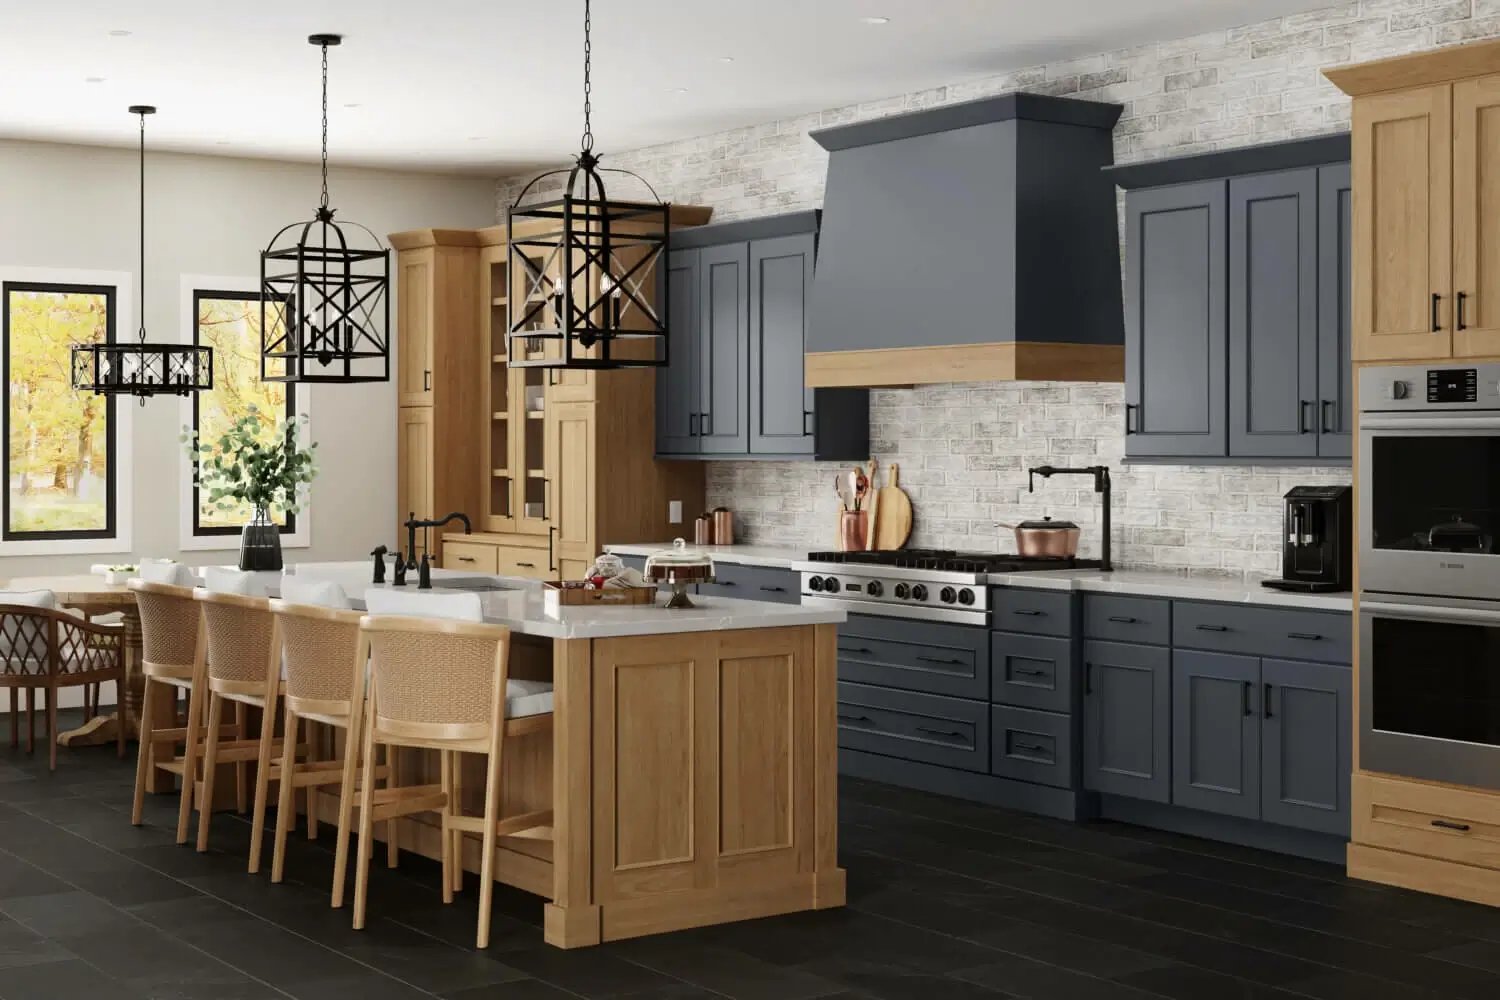 Traditional Overlay Cabinets in Kitchen